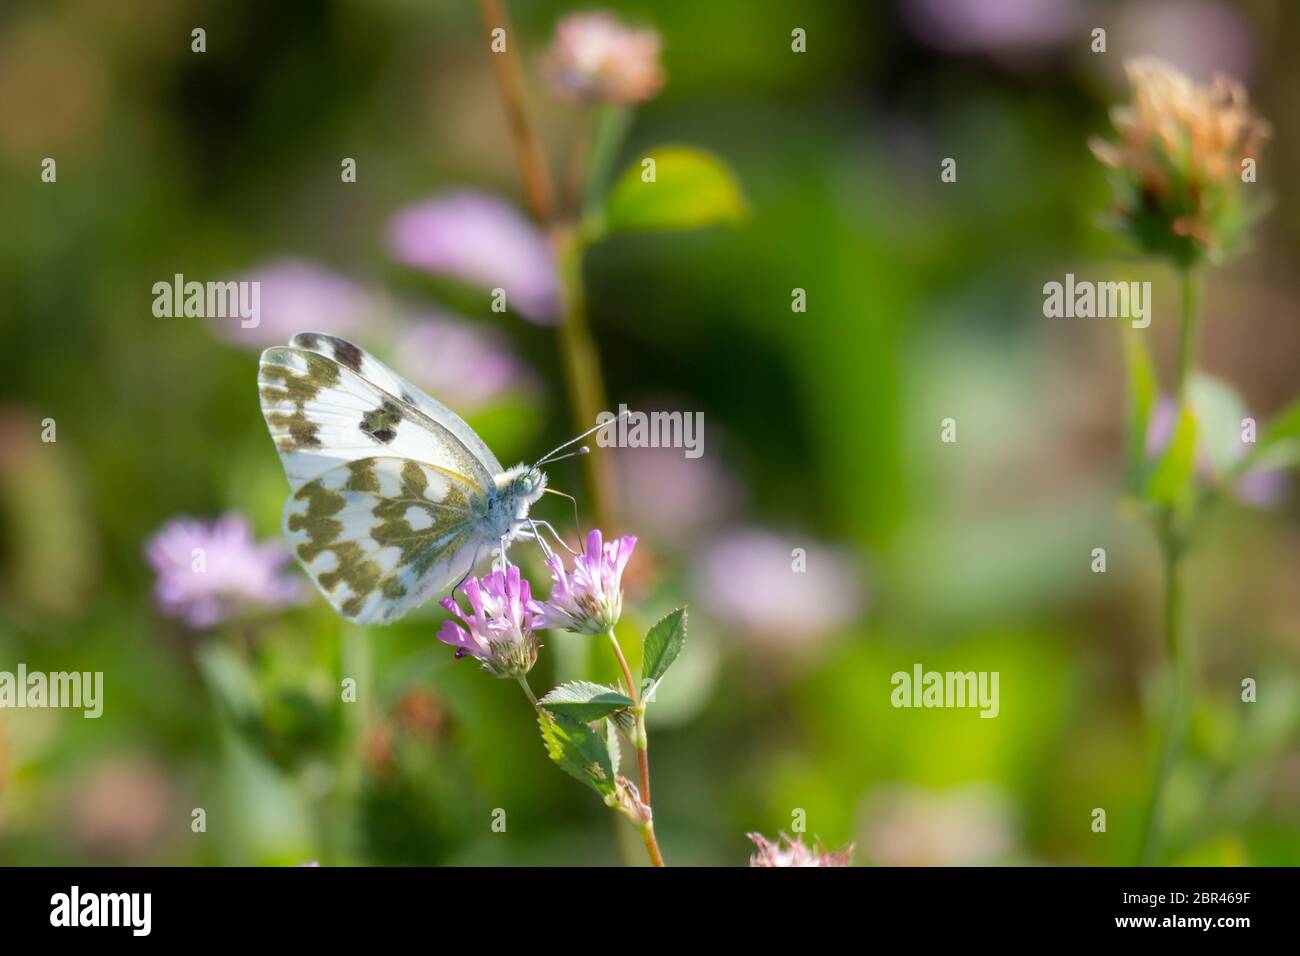 Close up shot of garden butterfly also known as Large white butterfly Stock Photo